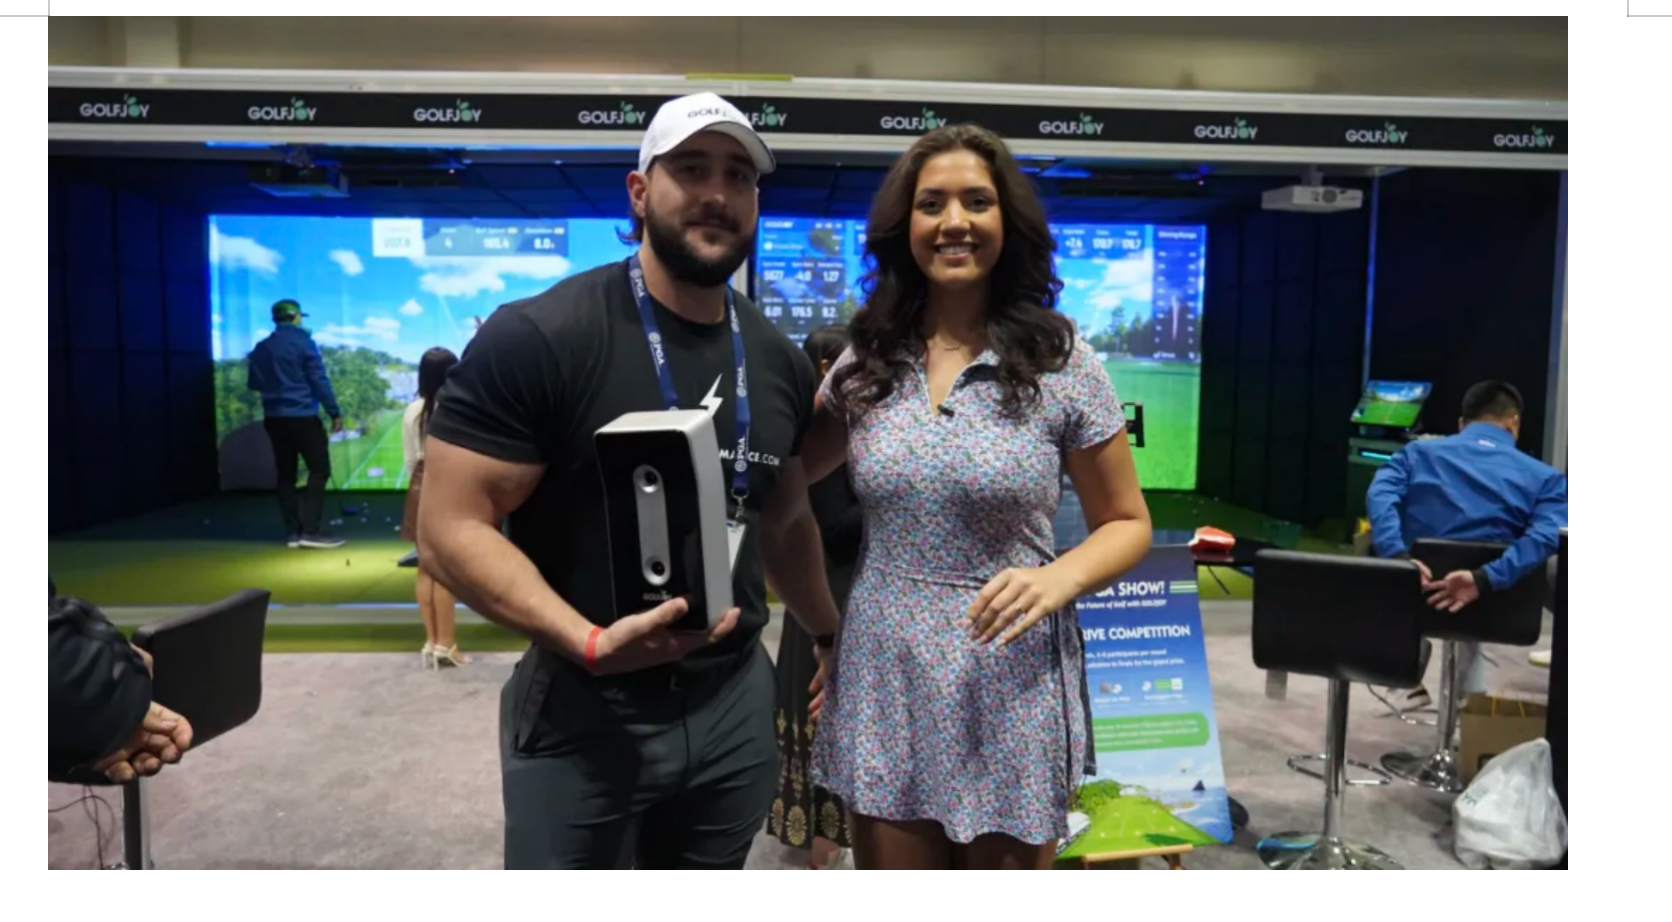 GOLFJOY leads the field at PGA Show